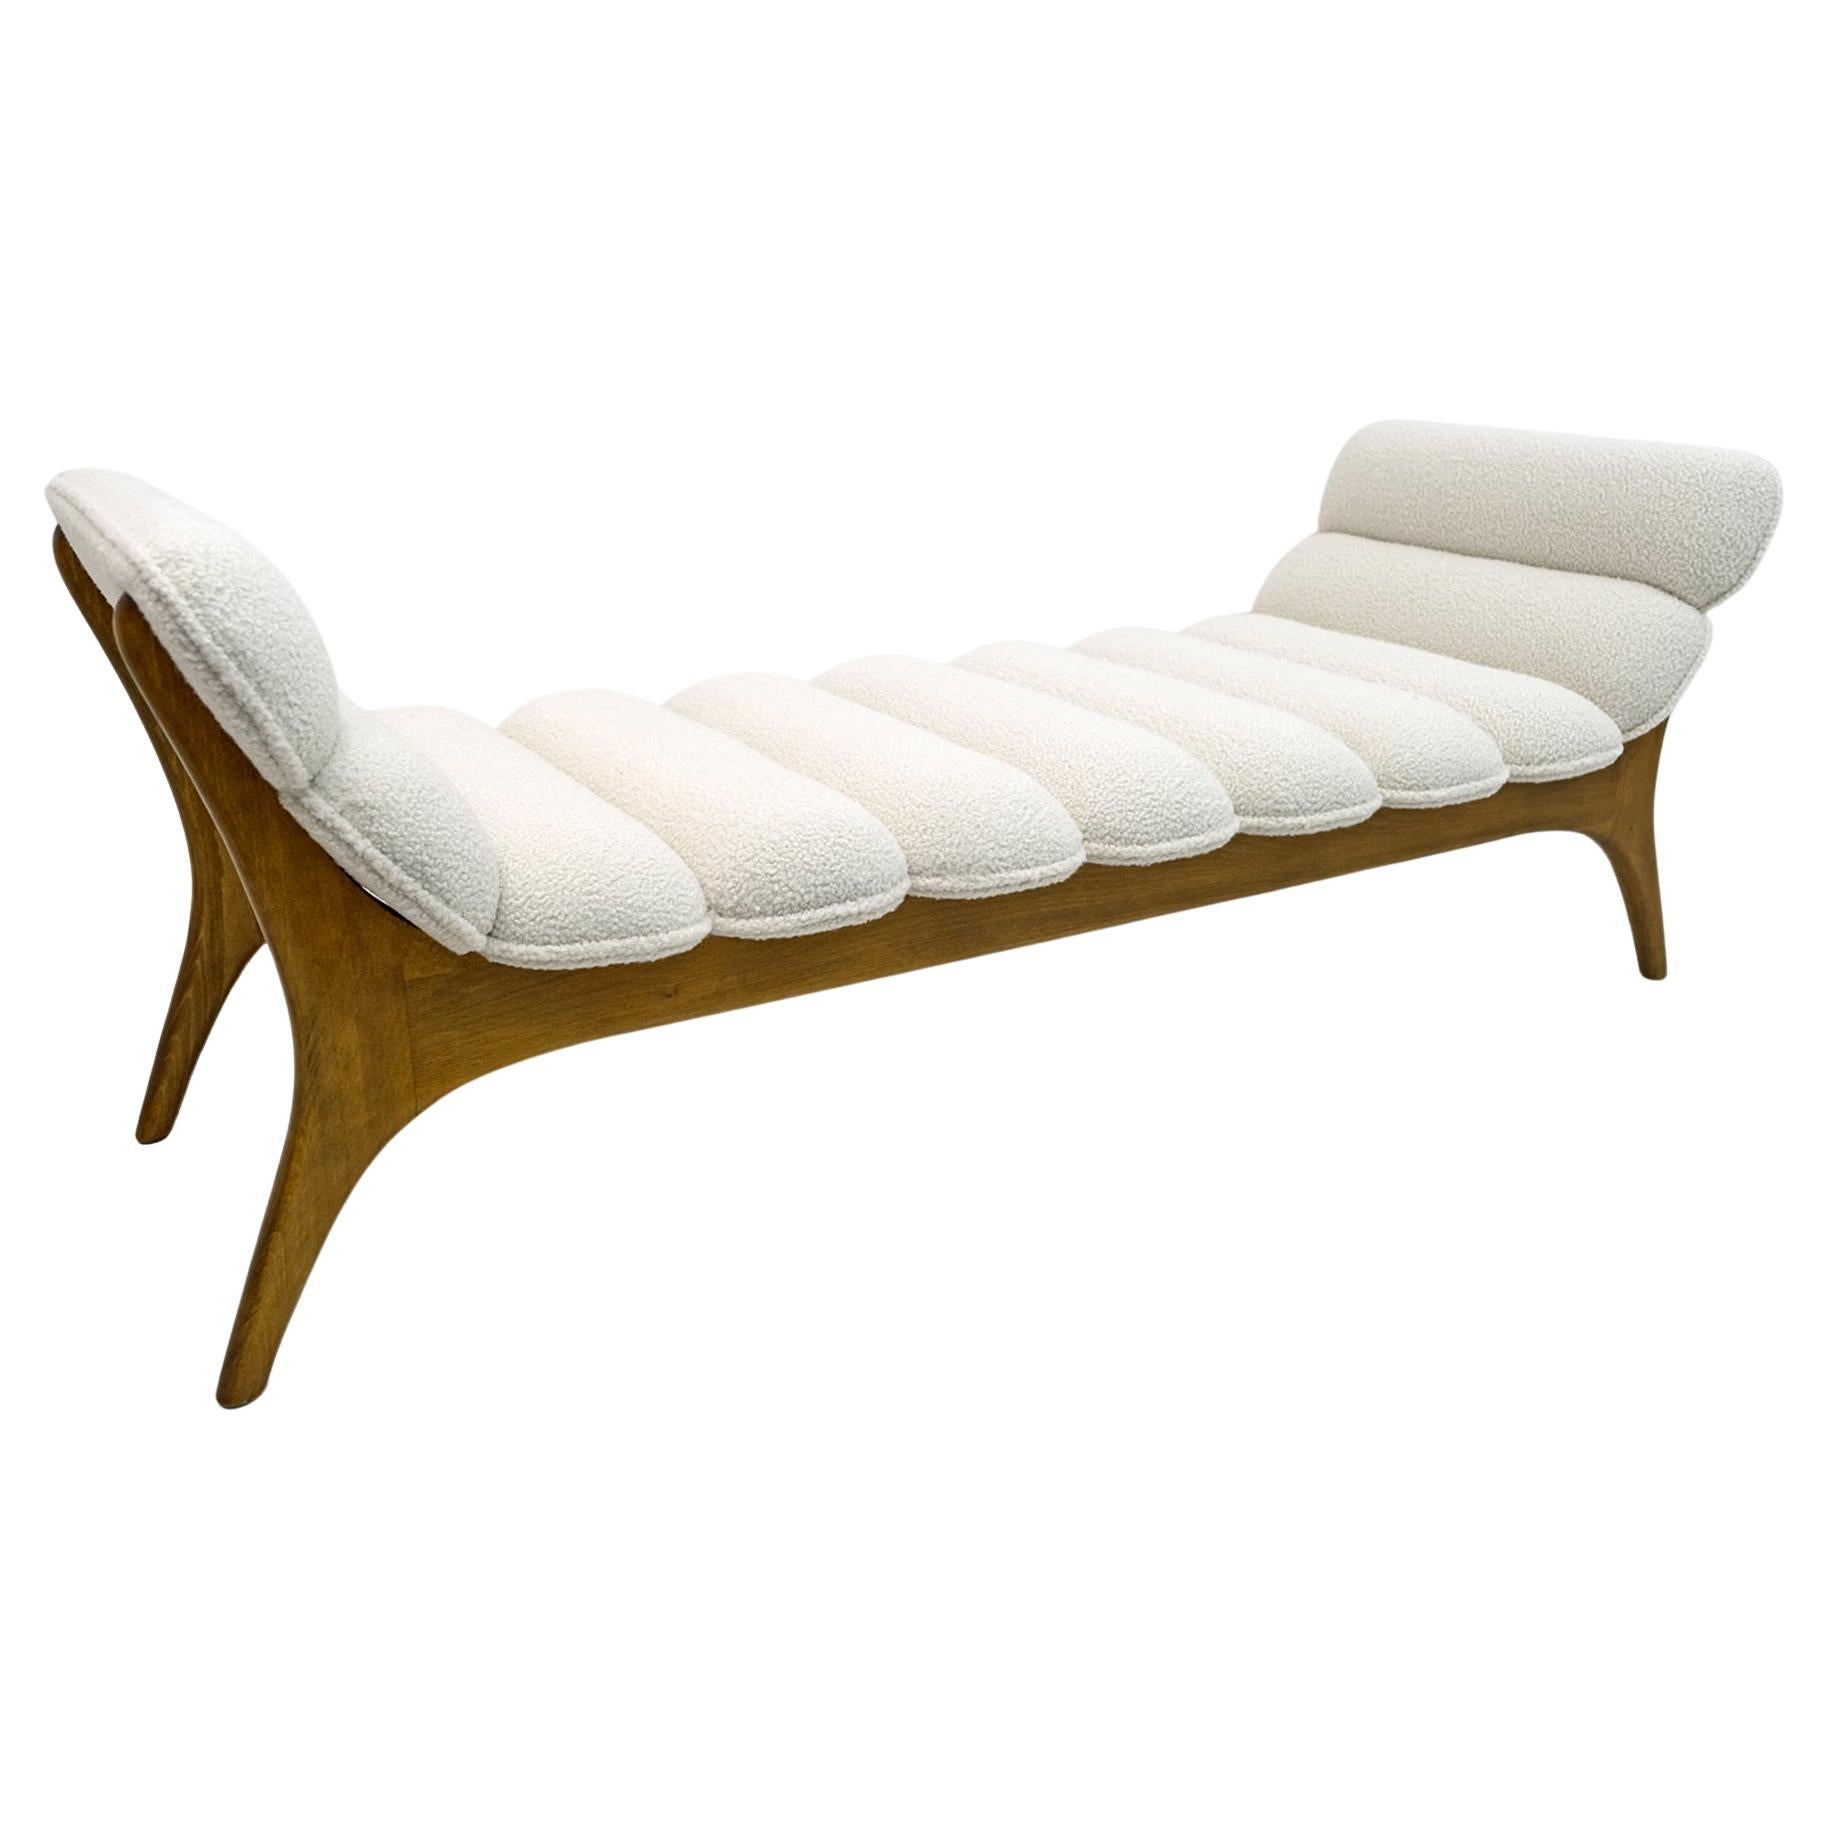 Adrian Pearsall Mid-Century Modern Walnut Chaise Lounge by Craft Associates For Sale